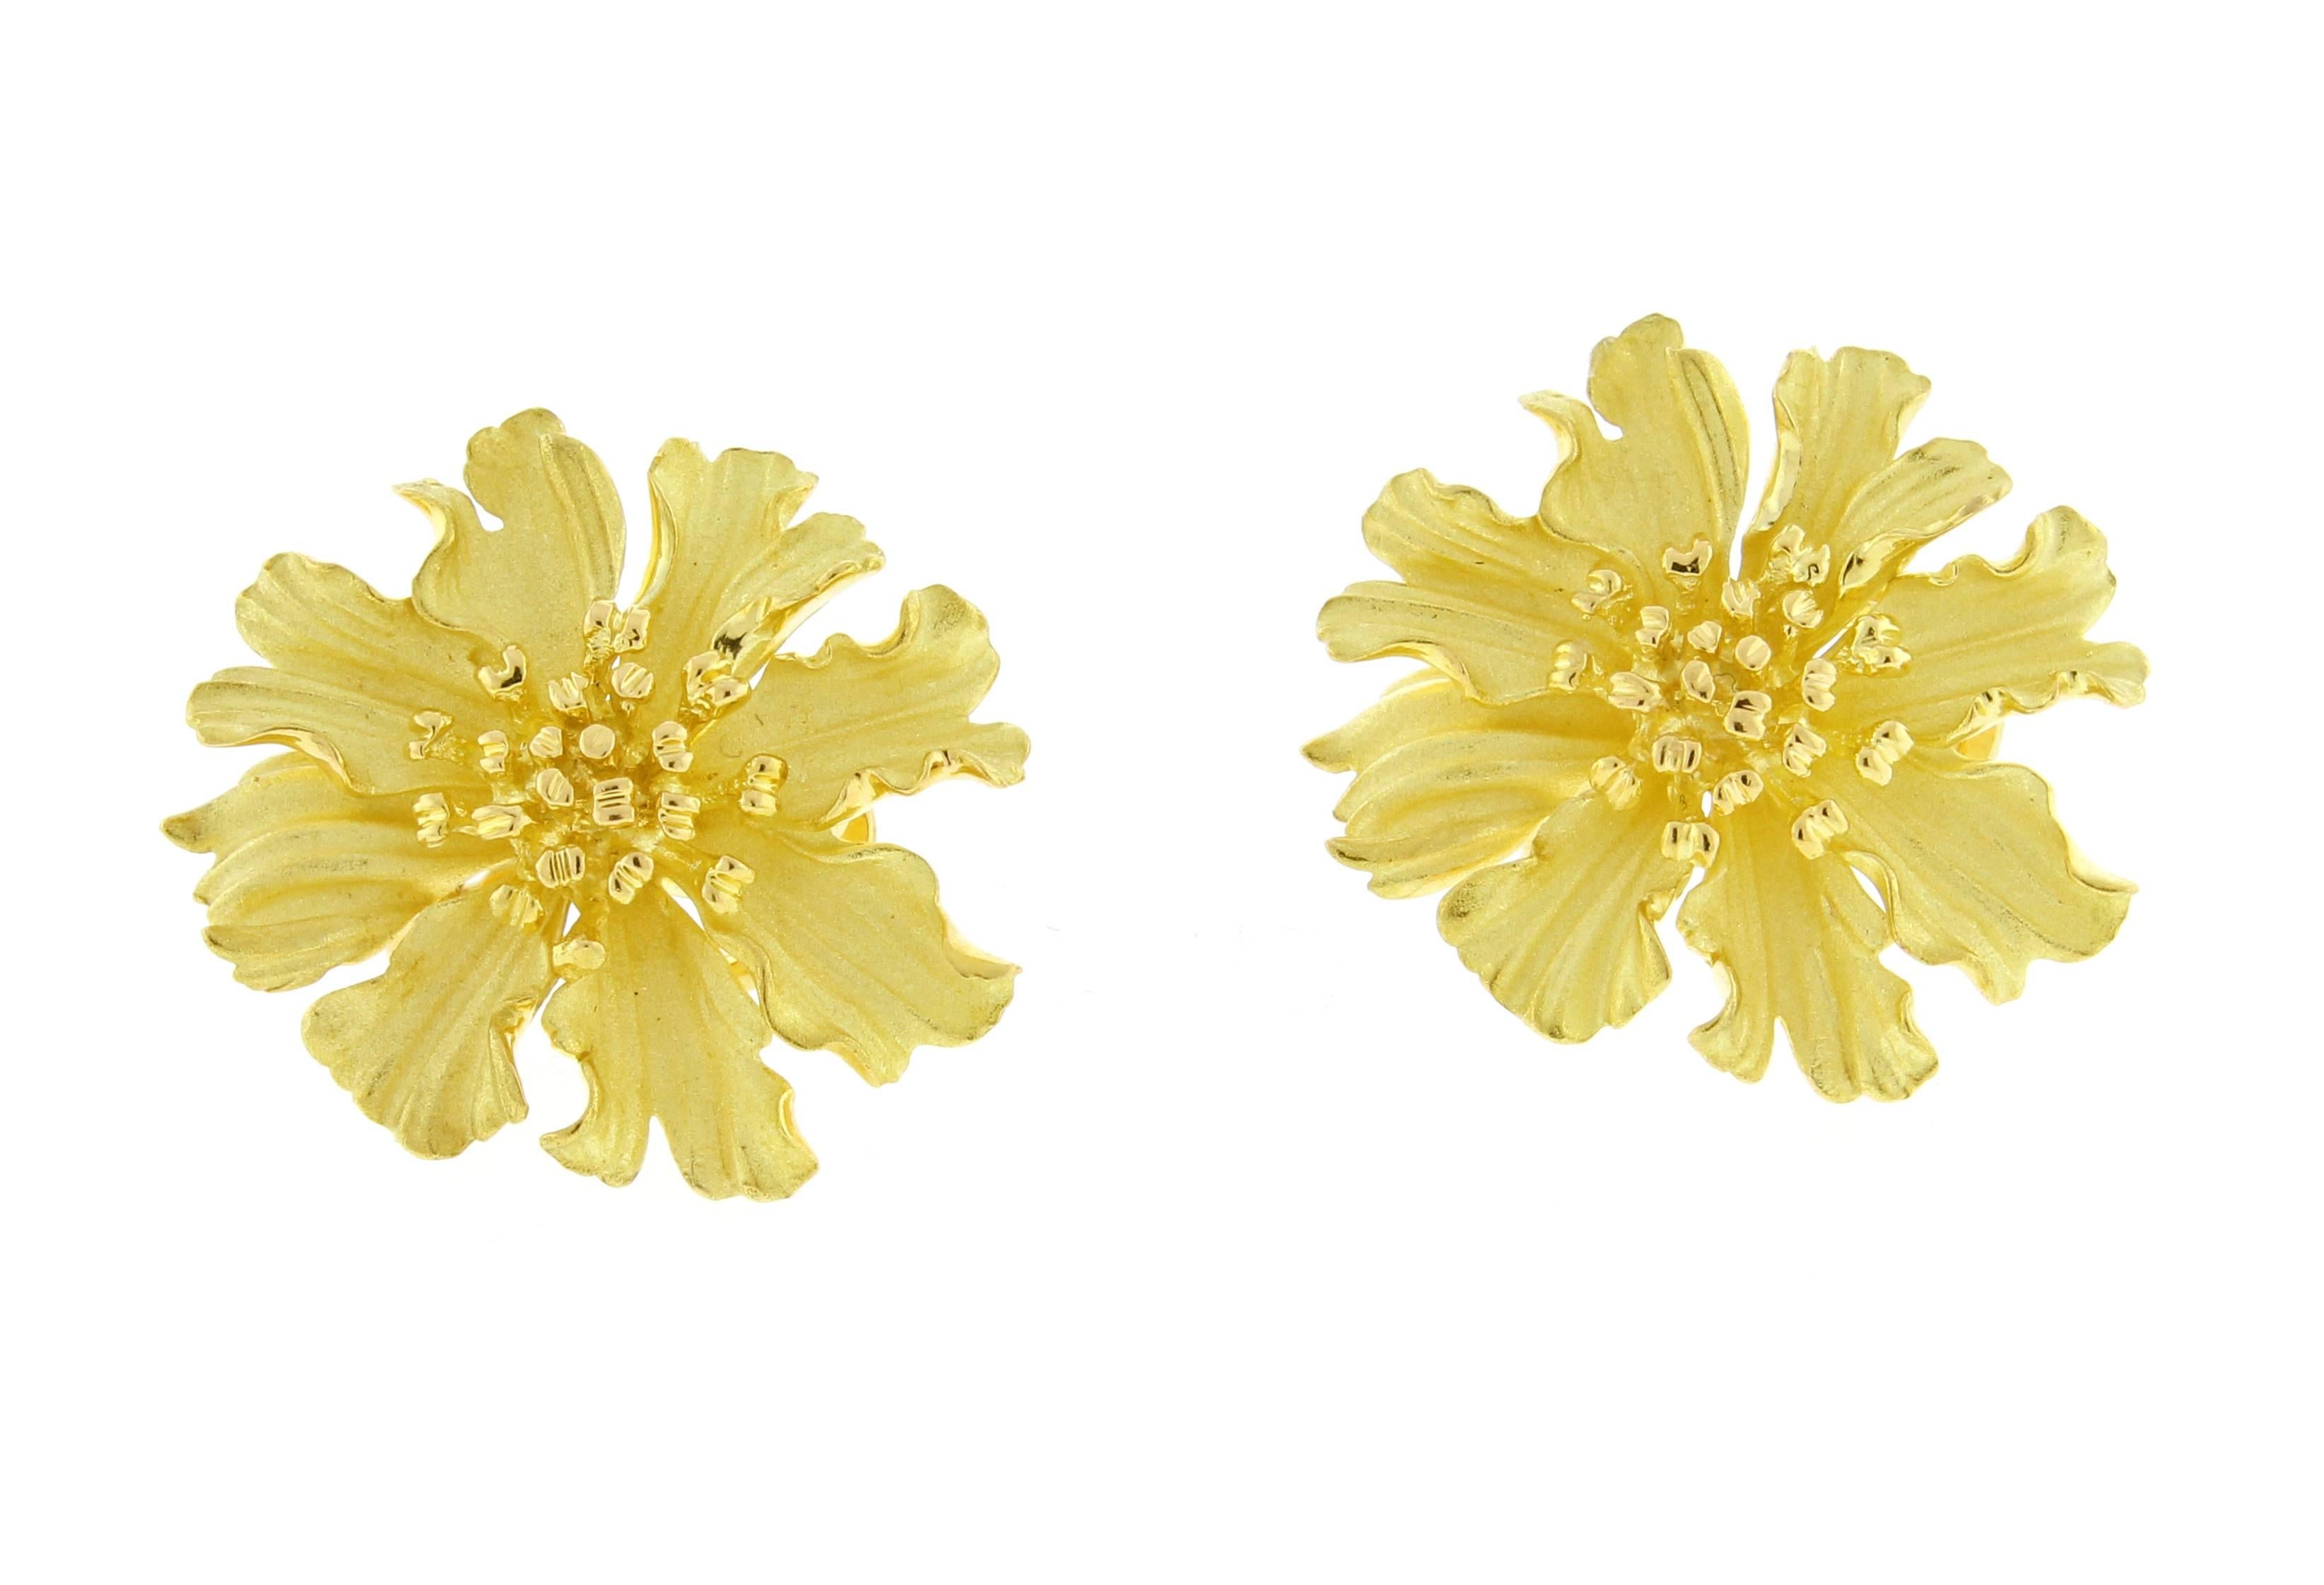 Tiffany & Co. has captured the beauty of the alpine rose in these striking  18 karat gold earrings. Rendered in matte and polished 18 karat gold these are as much a work of art as they are jewelry. 1 inch in diameter  15.6 grams